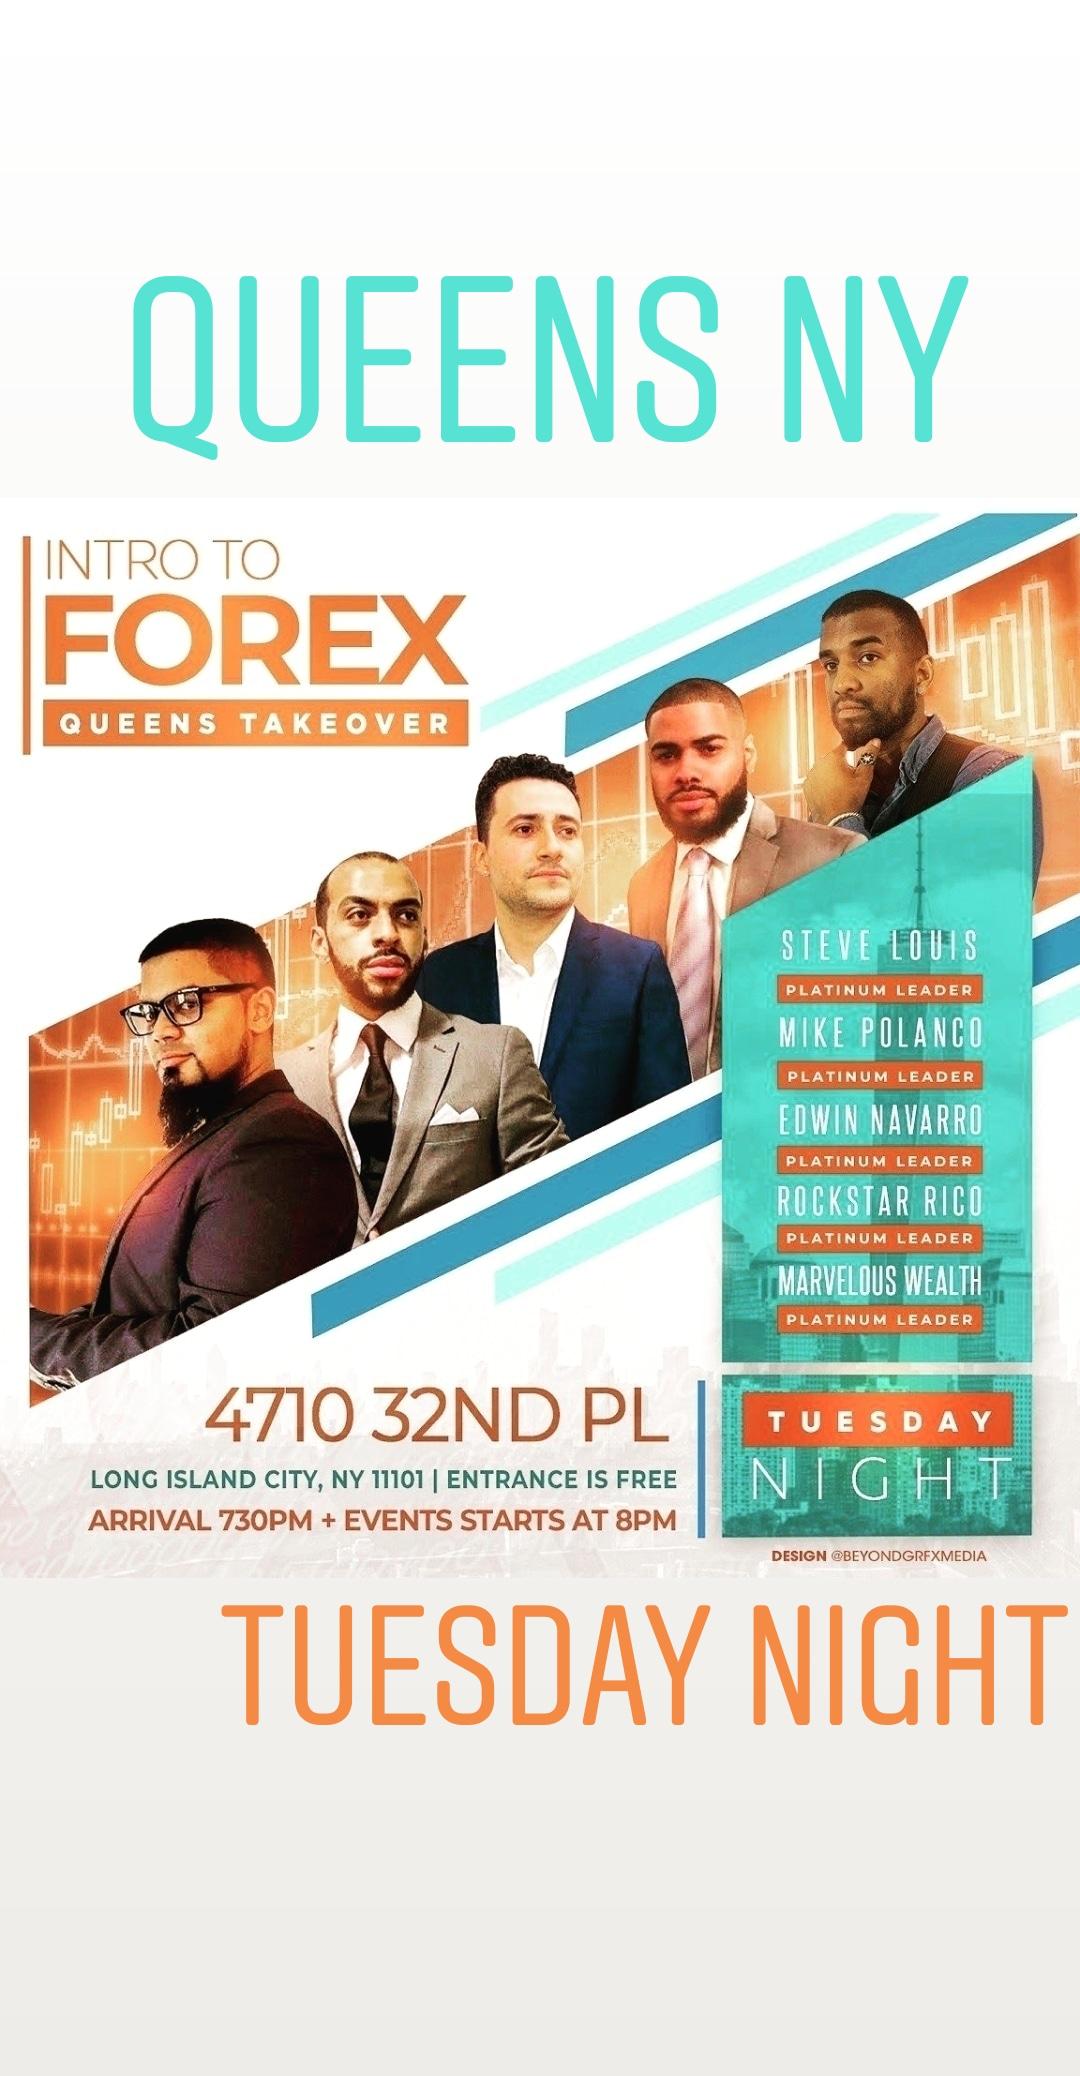 FREE Intro To Forex Trading Course in Queens, NY